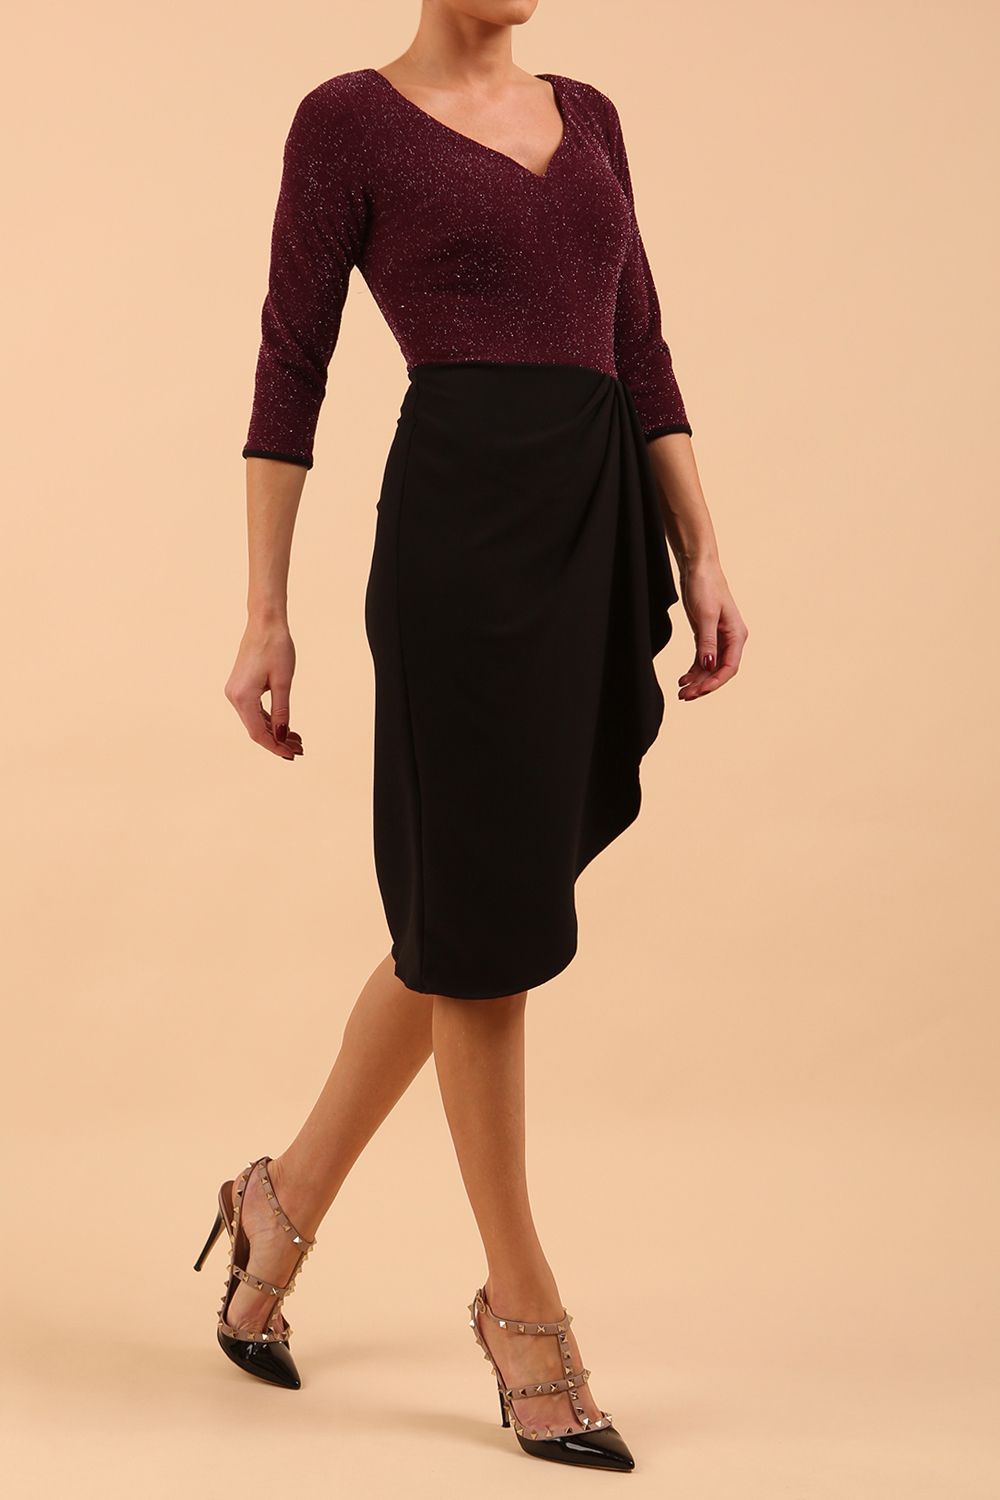 model is wearing diva catwalk contrast pencil dress with sleeve and asymmetric skirt detail in black and burgundy sparkle front